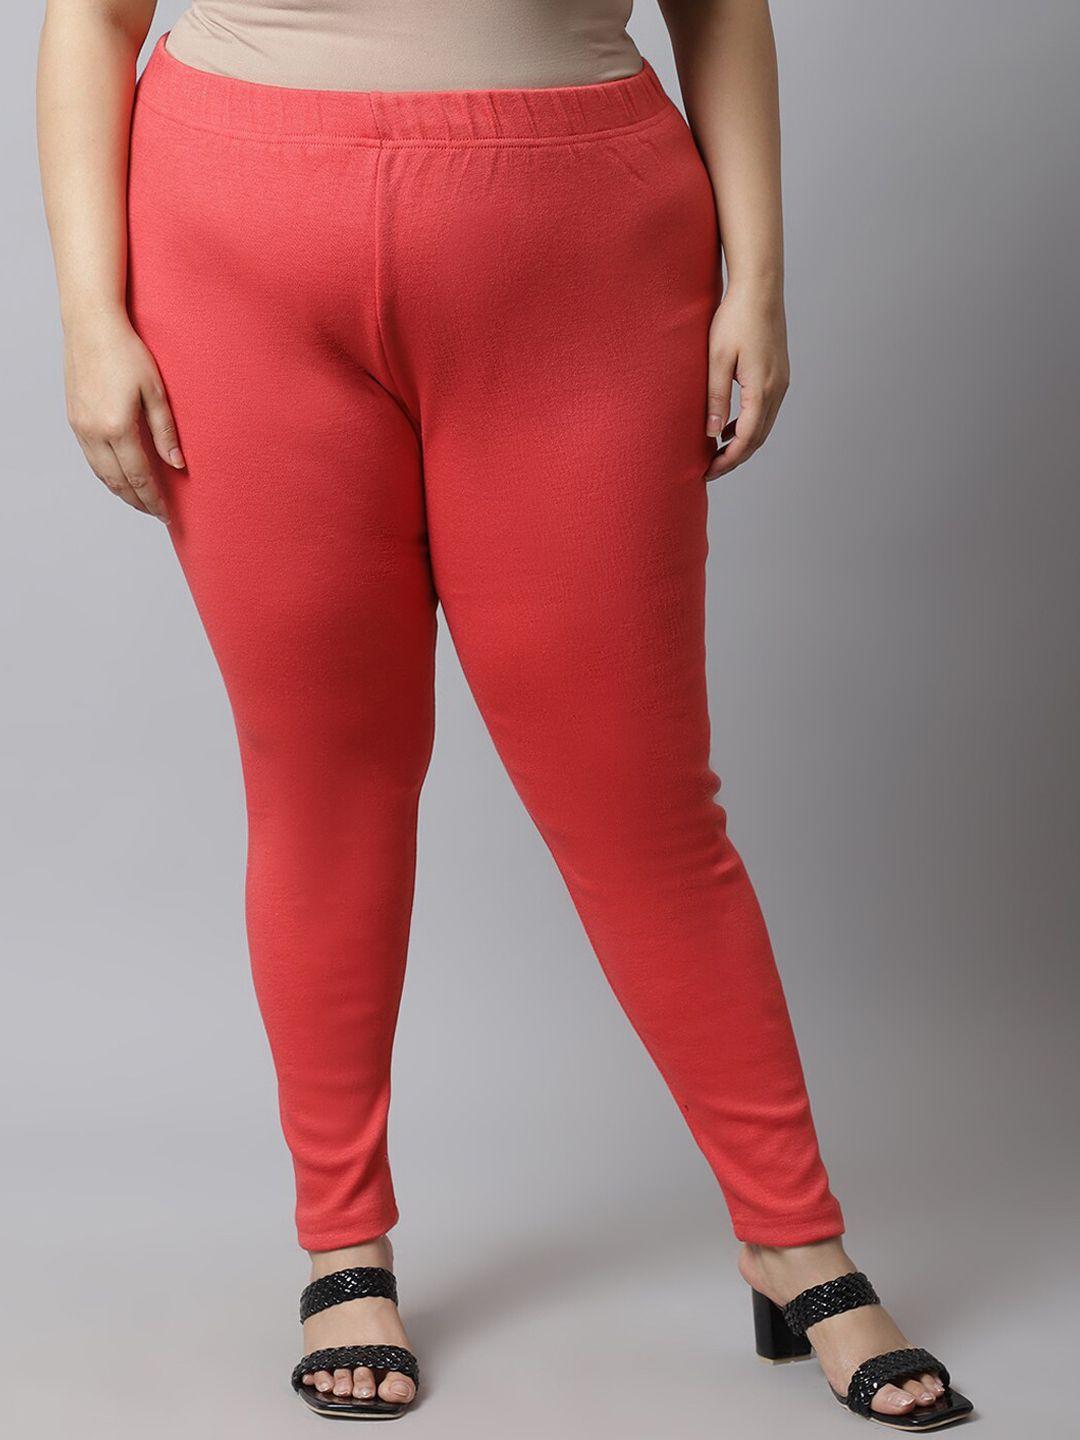 tag 7 women plus size peach-coloured solid ankle-length  leggings